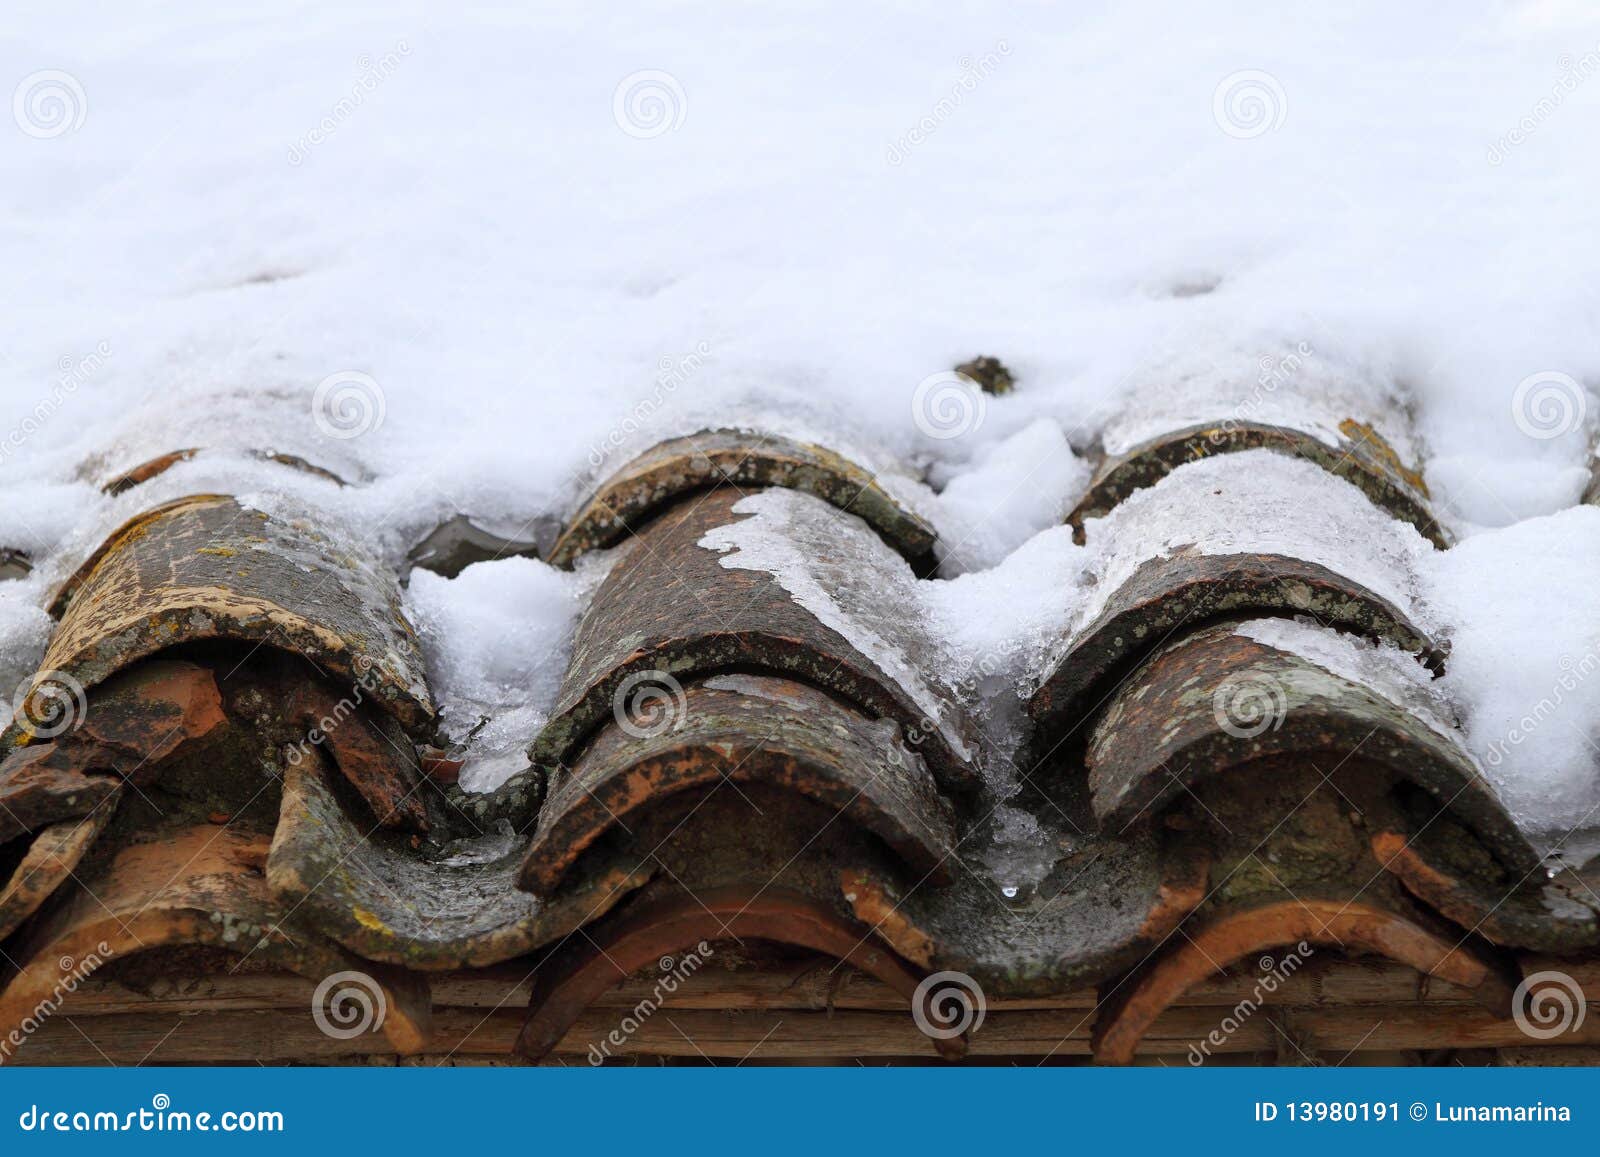 aged clay roof tiles snowed under winter snow